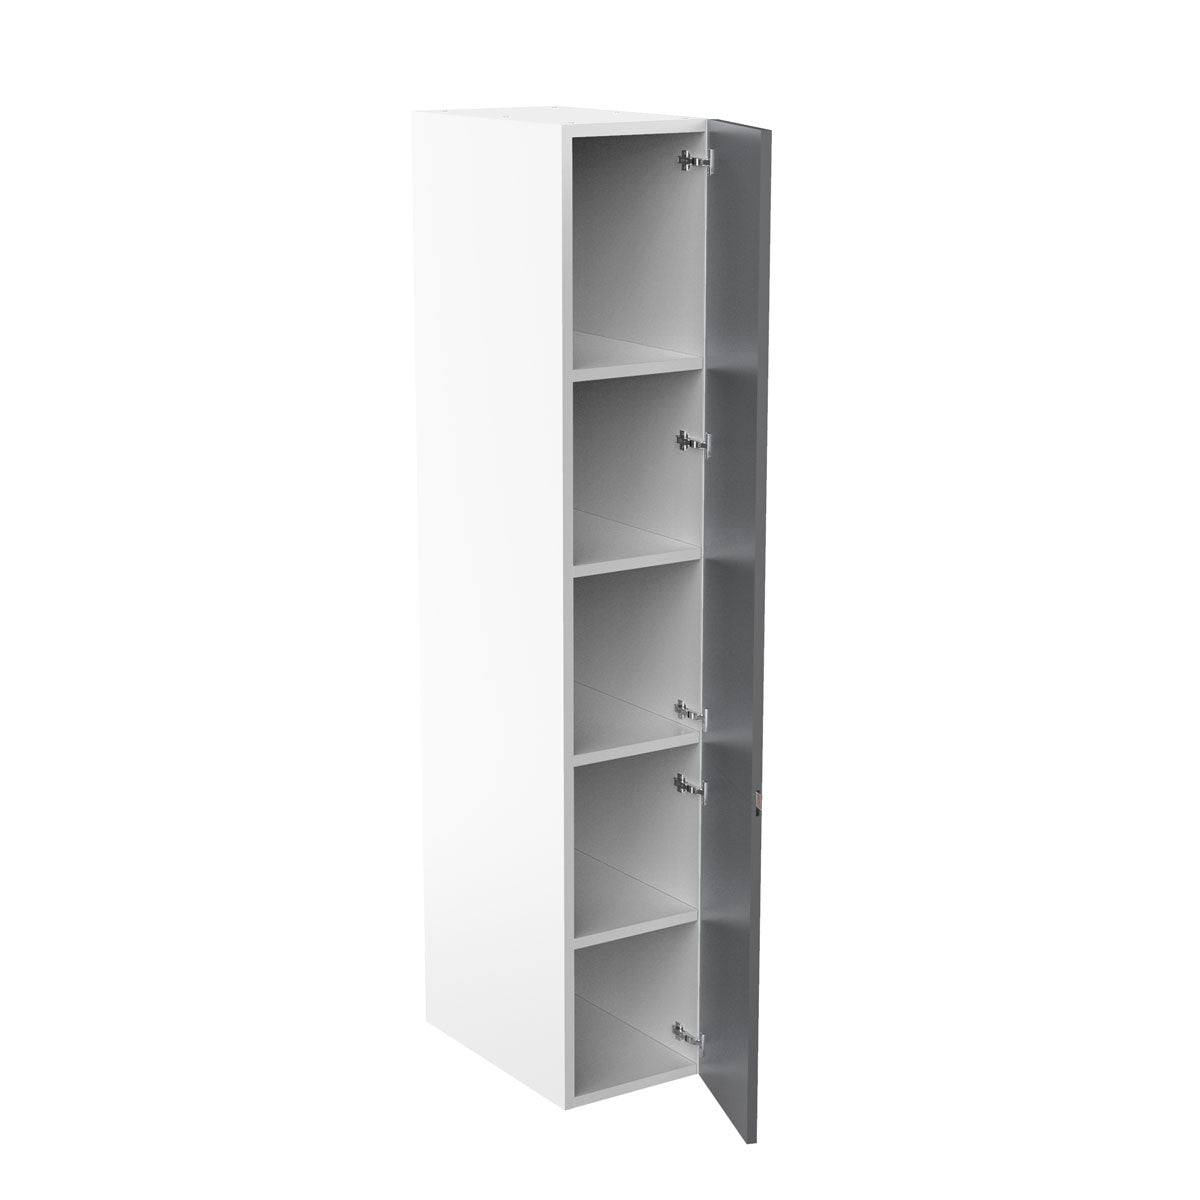 RTA - Lacquer Grey - Single Door Tall Cabinets | 15"W x 84"H x 23.8"D